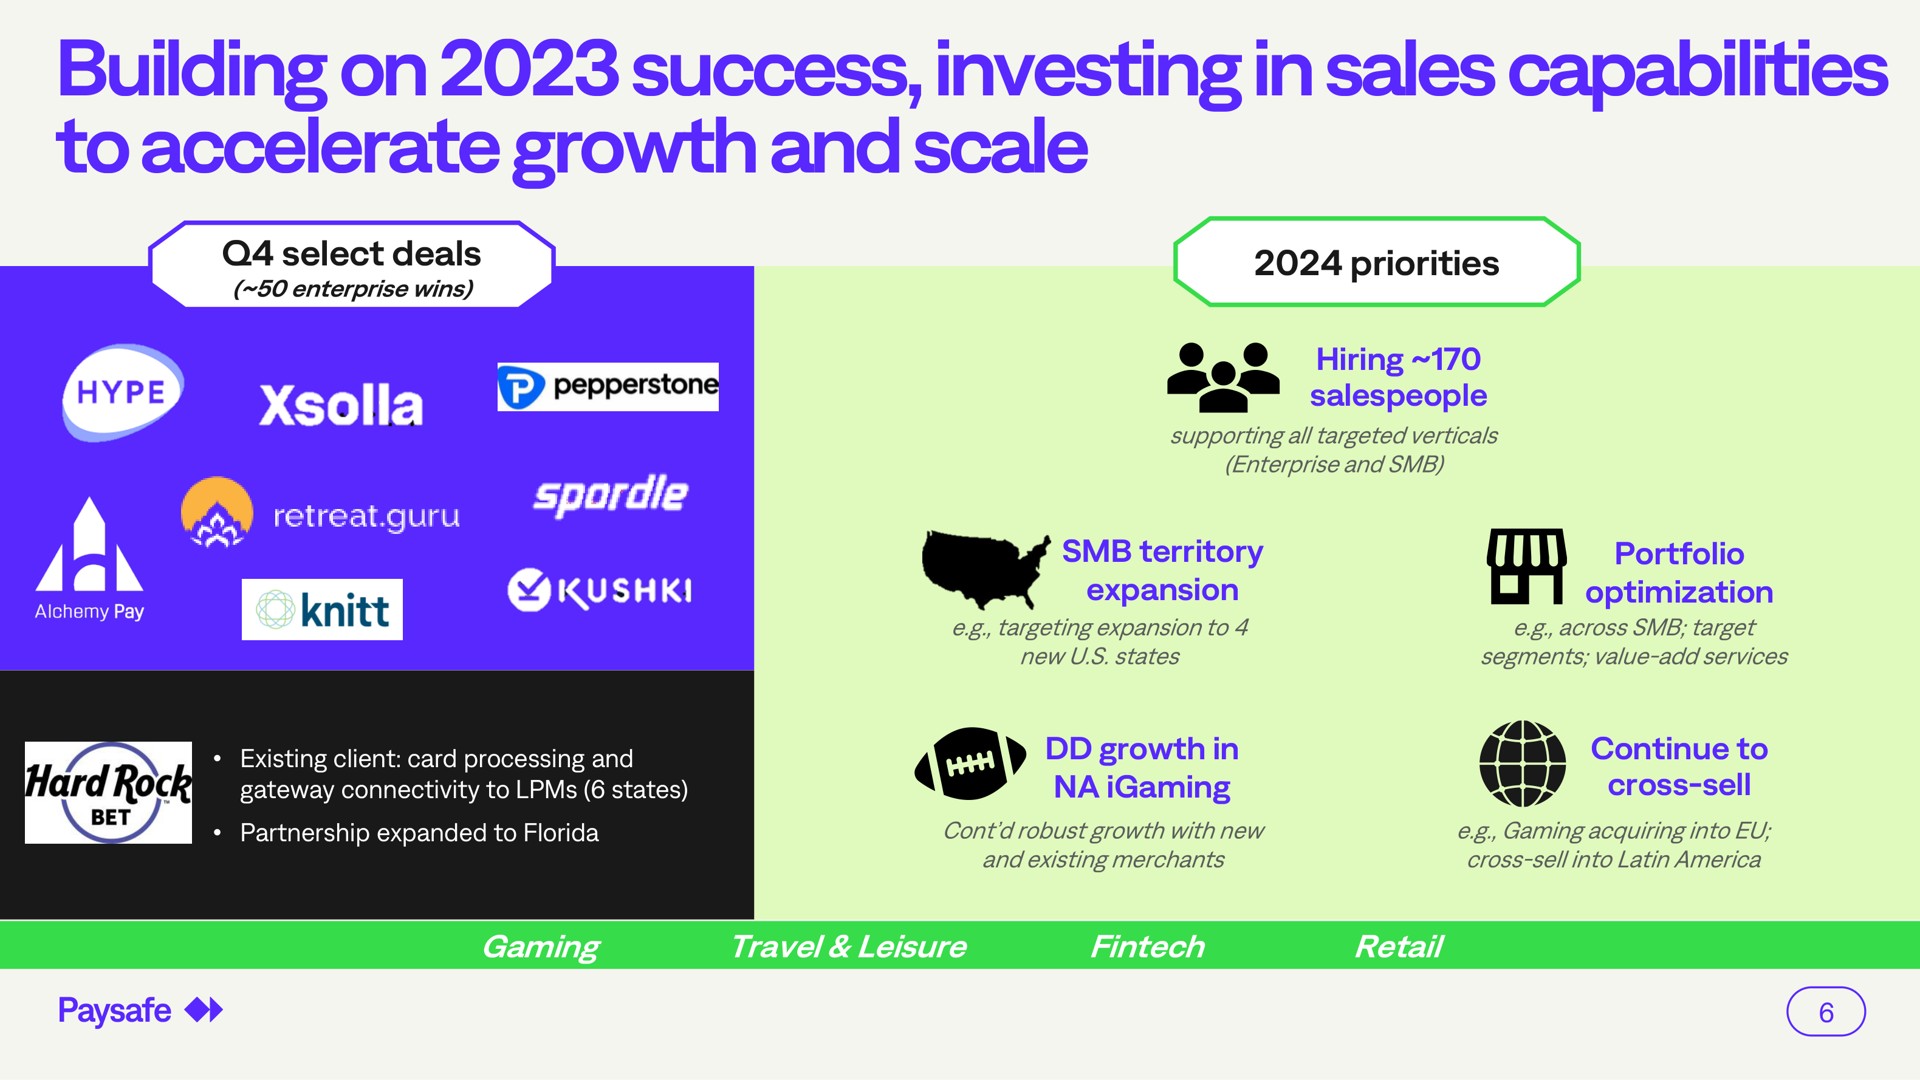 building on success investing in sales capabilities to accelerate growth and scale | Paysafe